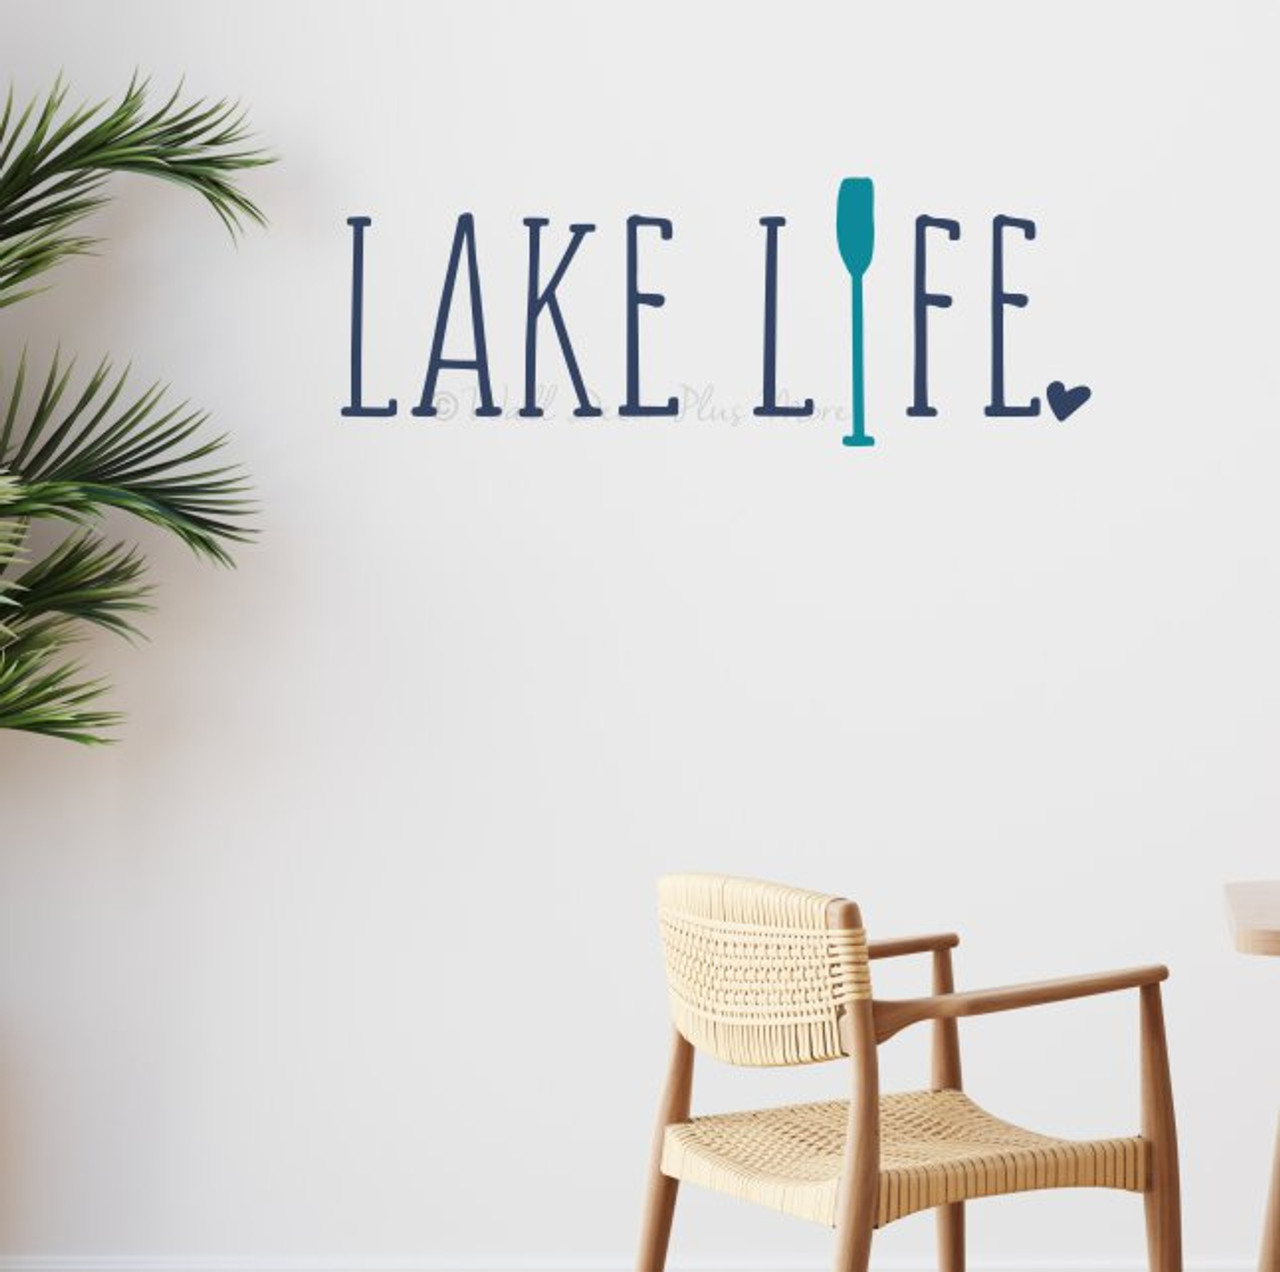 Lake House Wall Decal - Fishing Wall Art Decals - Camping Wall Stickers for  Lake Houses - RV Camper Decals Sayings for Wall Decor - Fish Wall Sticker